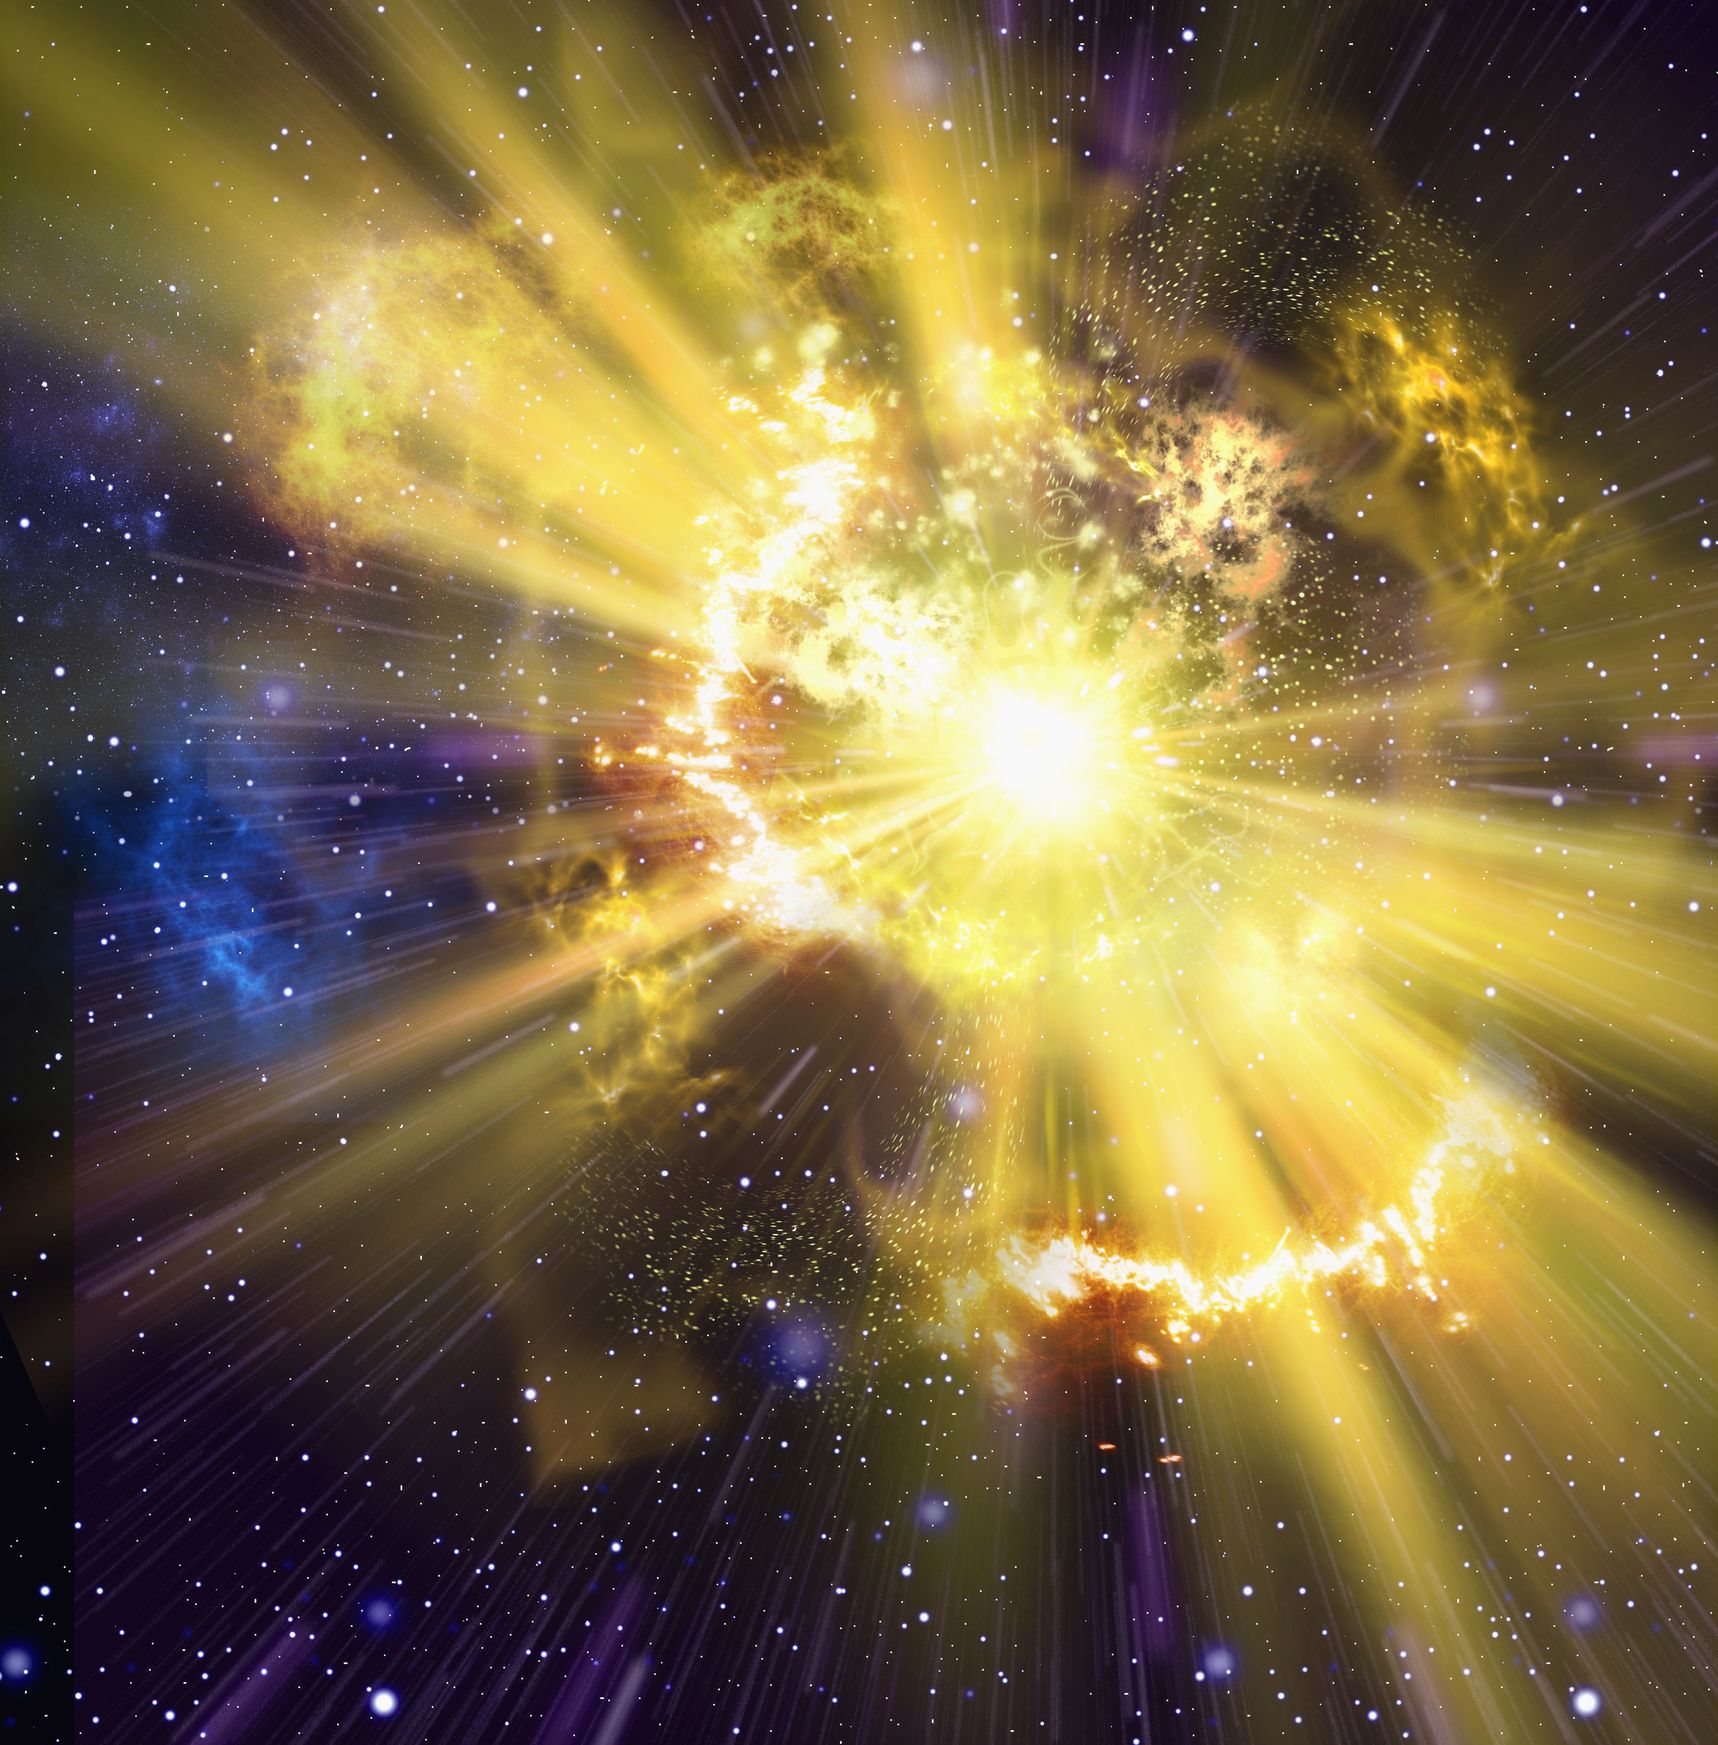 How Close Would a Supernova Have to Be to Kill Us All?